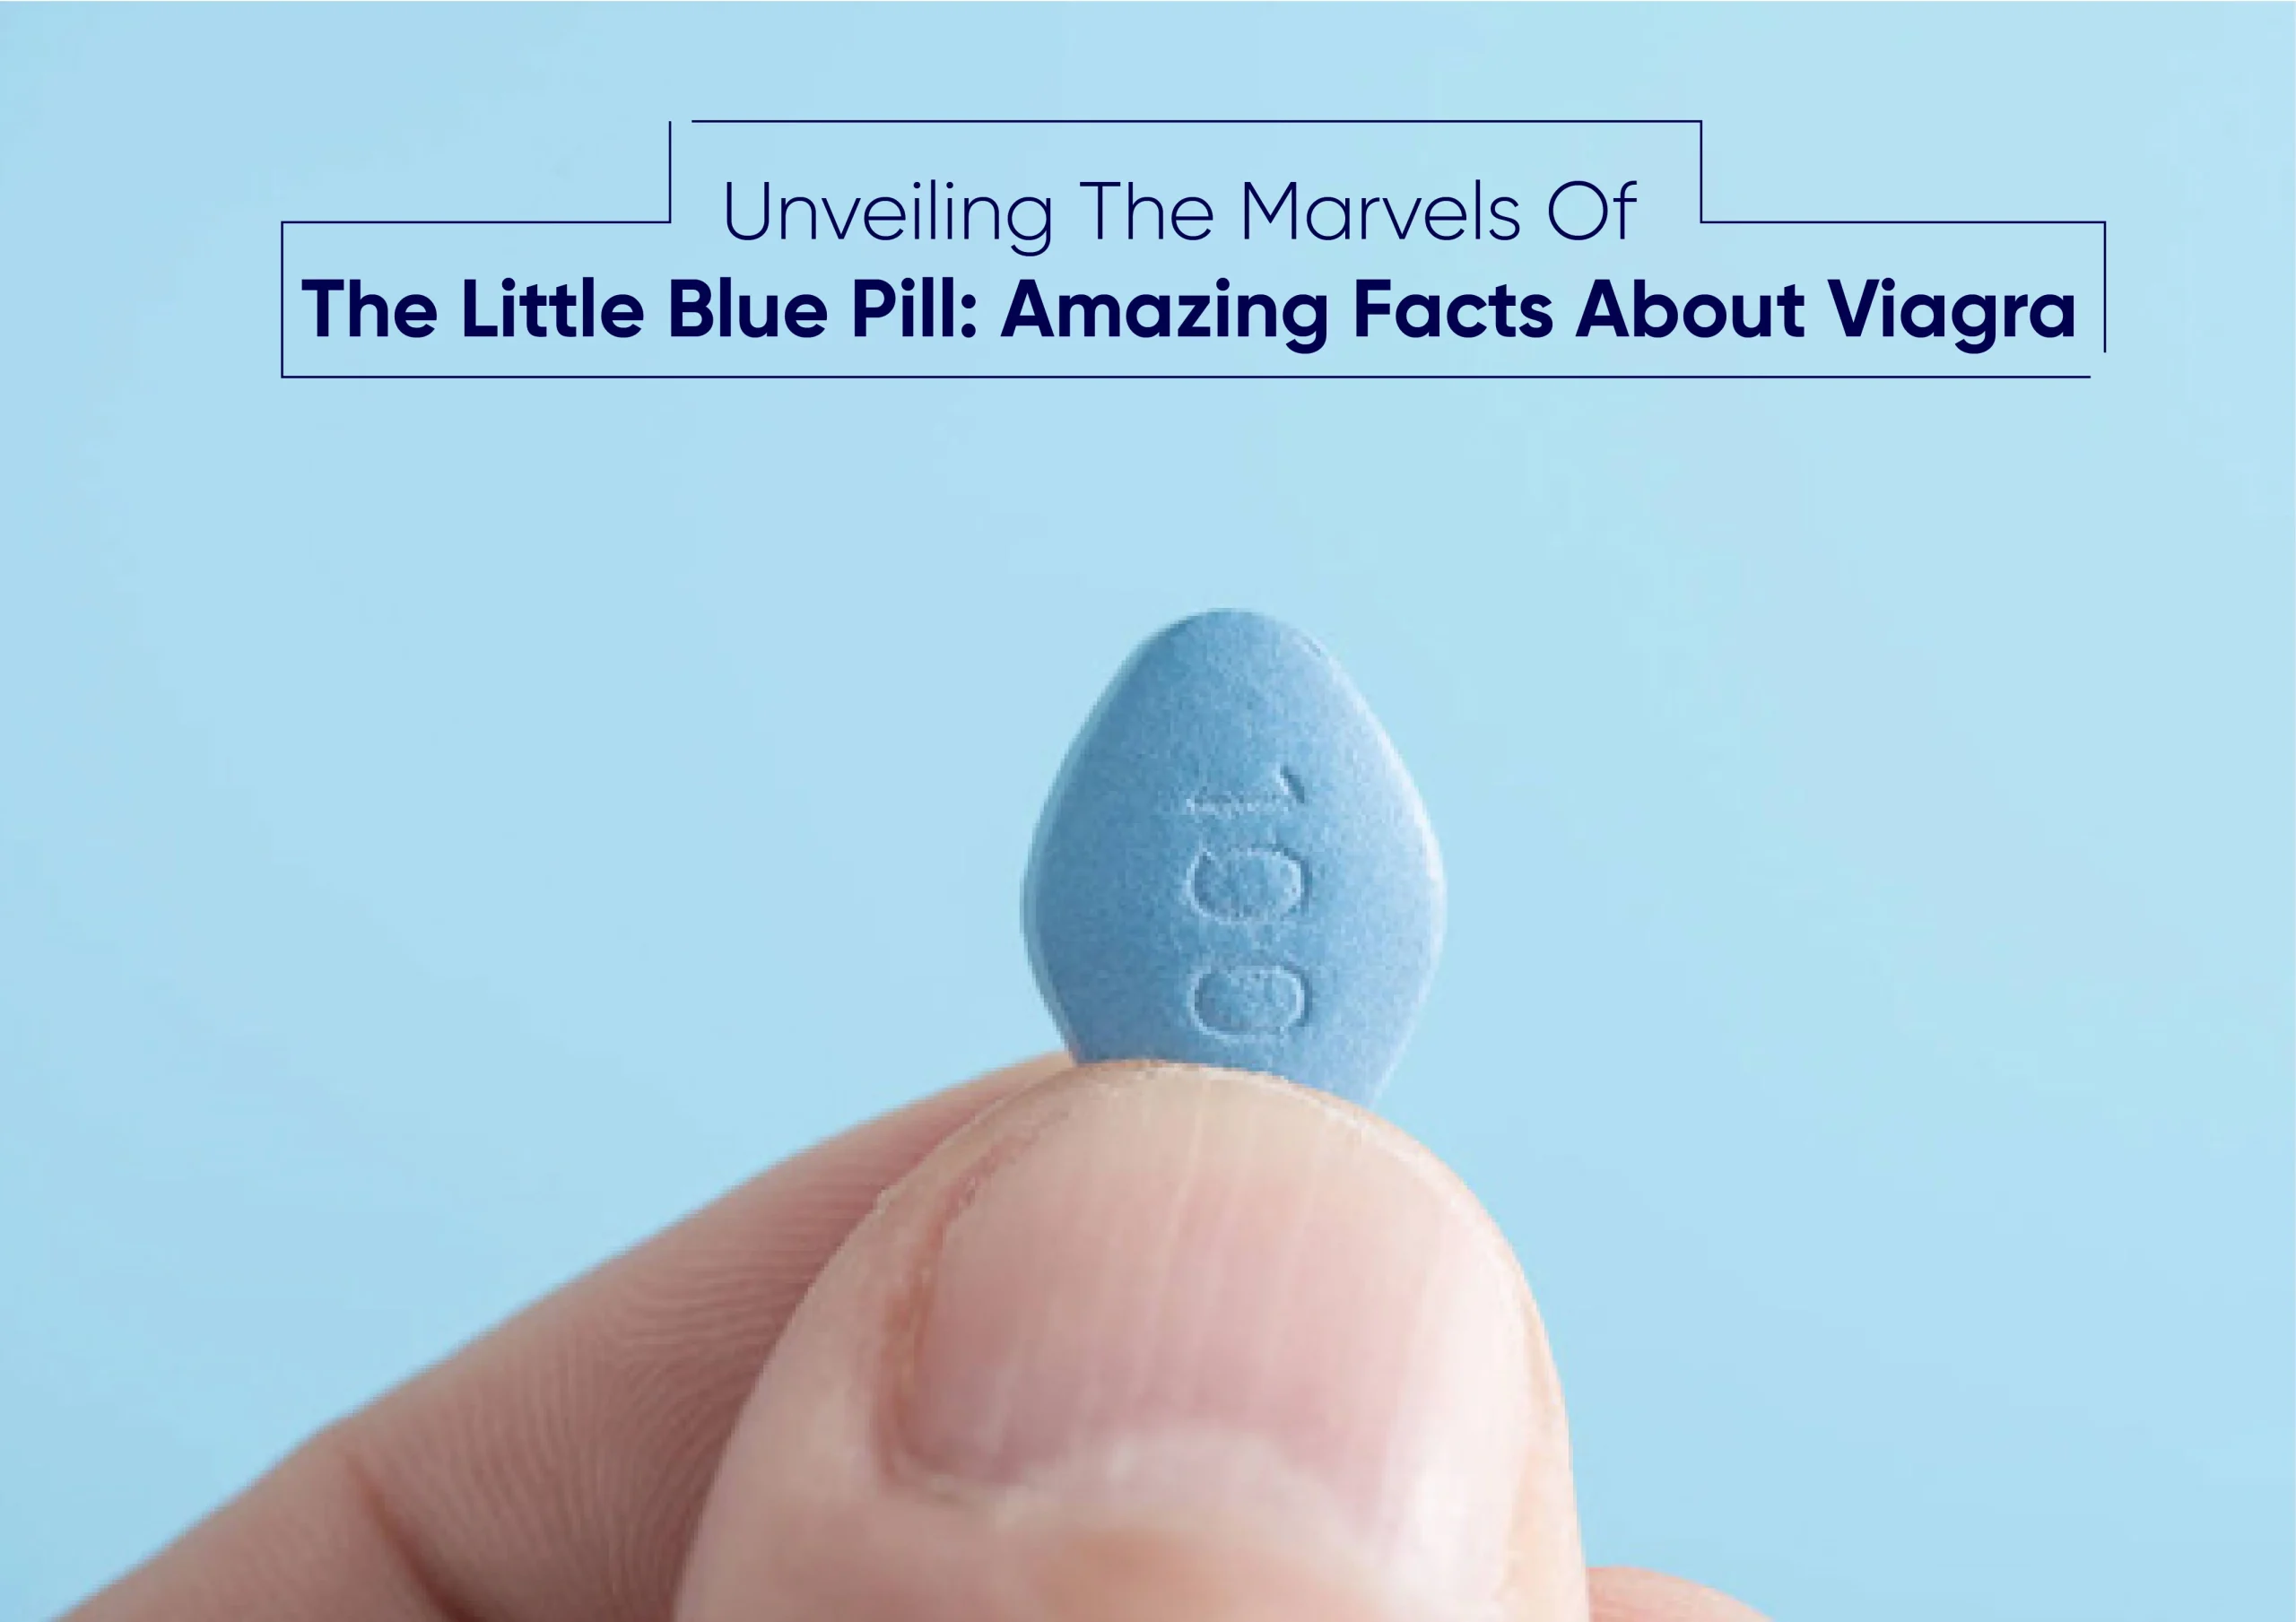 unveiling-the-marvels-of-the-little-blue-pill-amazing-facts-about-viagra